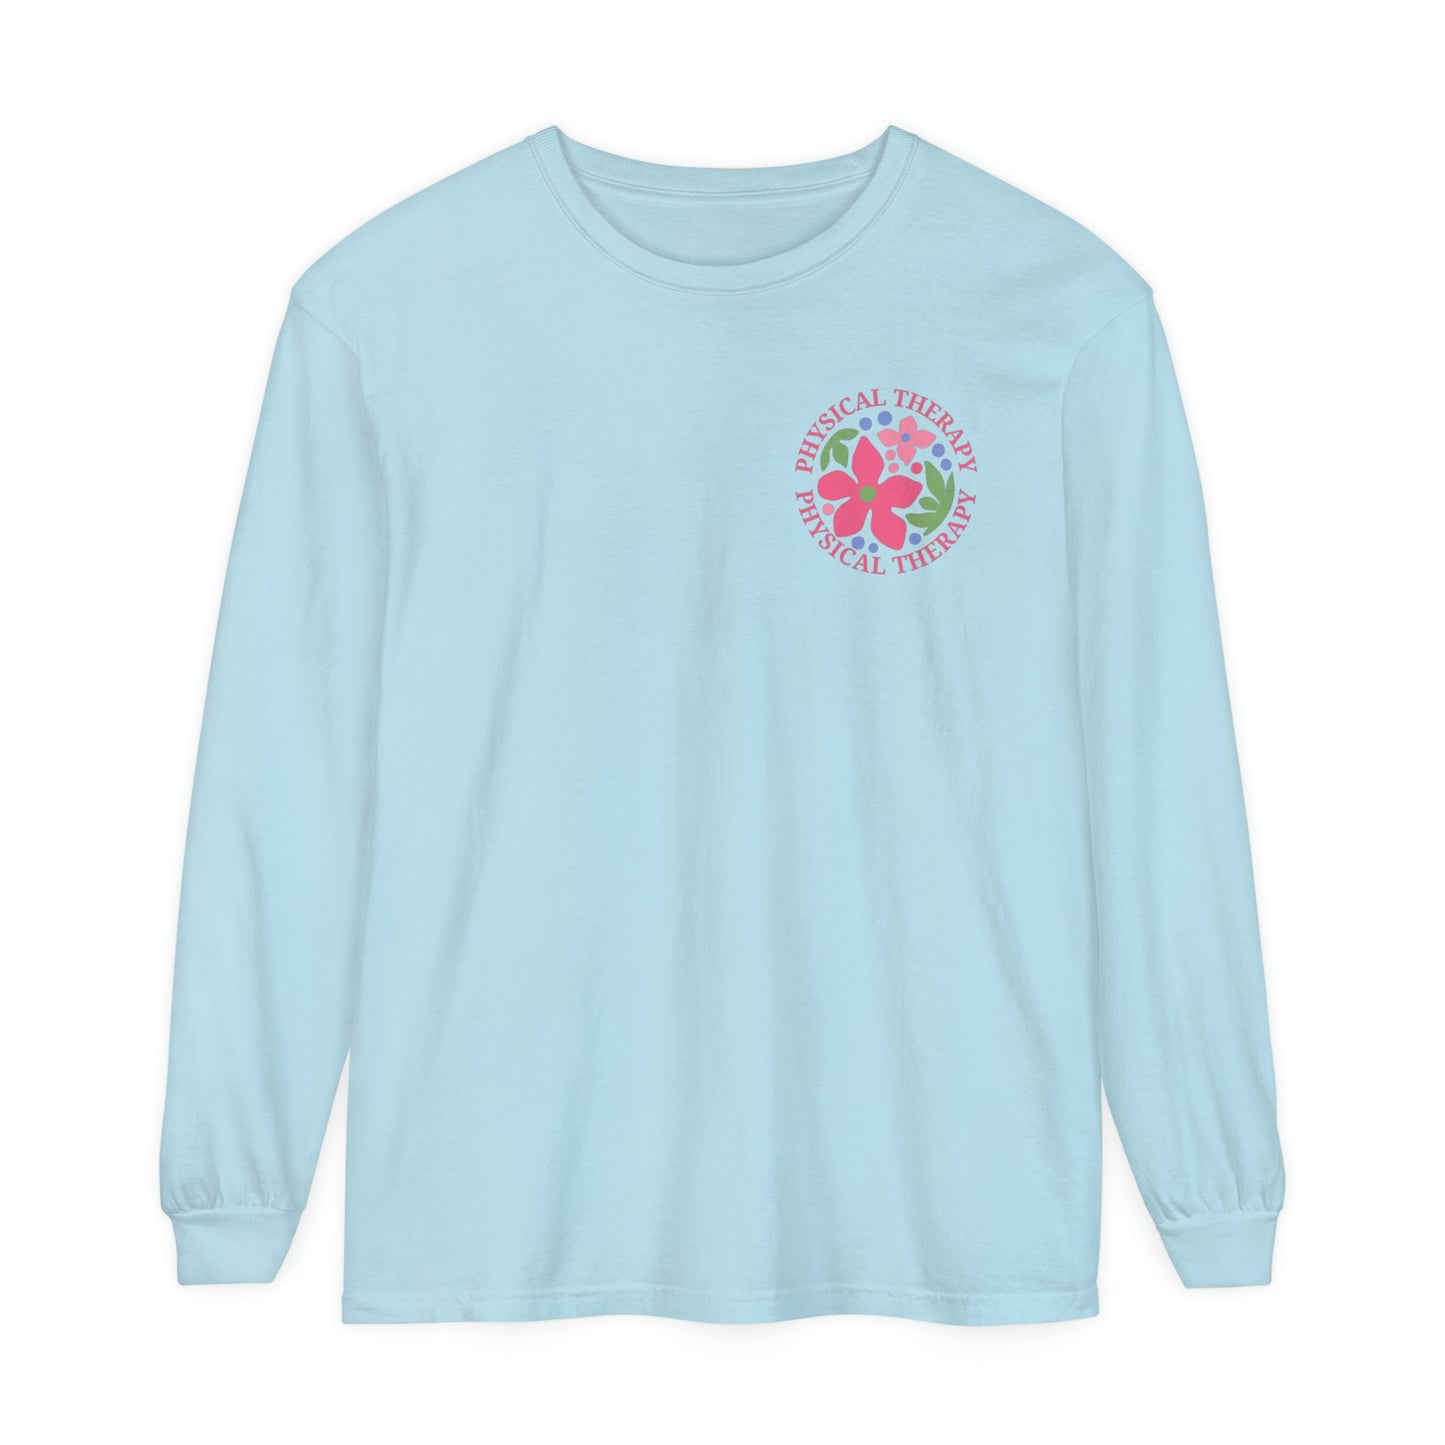 Physical Therapy Long Sleeve Comfort Colors T-shirt